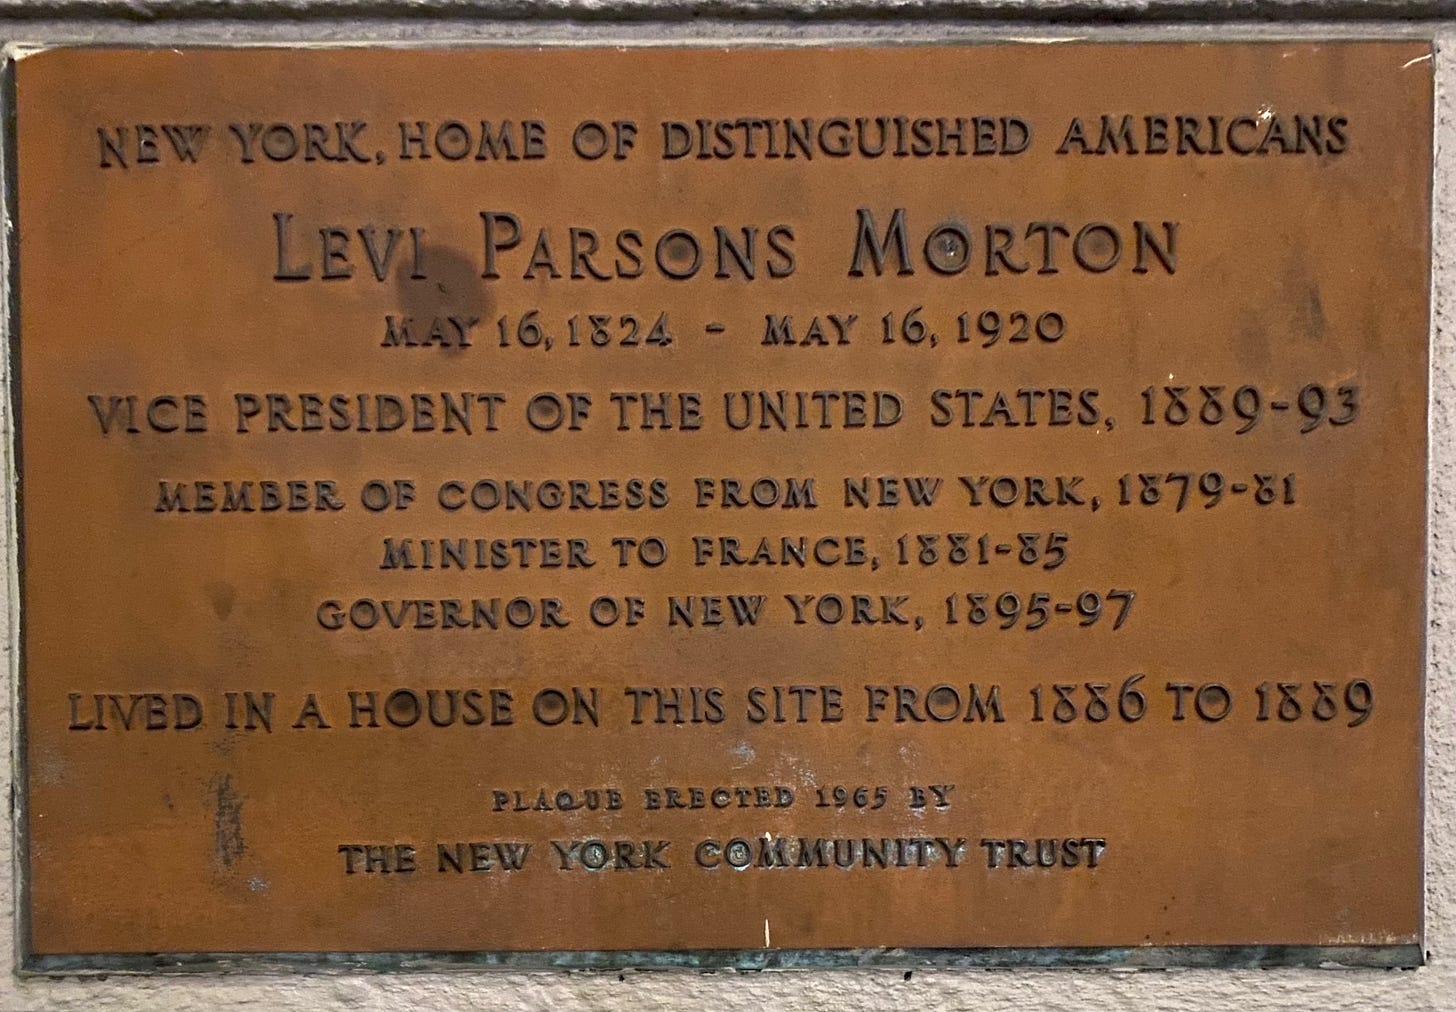 A copper colored plaque that reads: New York, Home of Distinguished Americans. Levi Parsons Morton (May 16, 1824 - May 16, 1920). Vice President of the United States, 1889 - 93. Member of Congress from New York, 1879 - 81. Minister of France, 1881 - 85. Governor of New York, 1895 - 97. Lived in a house on this site from 1886 - 1889. Plaque erected 1965 by The New York Community Trust.